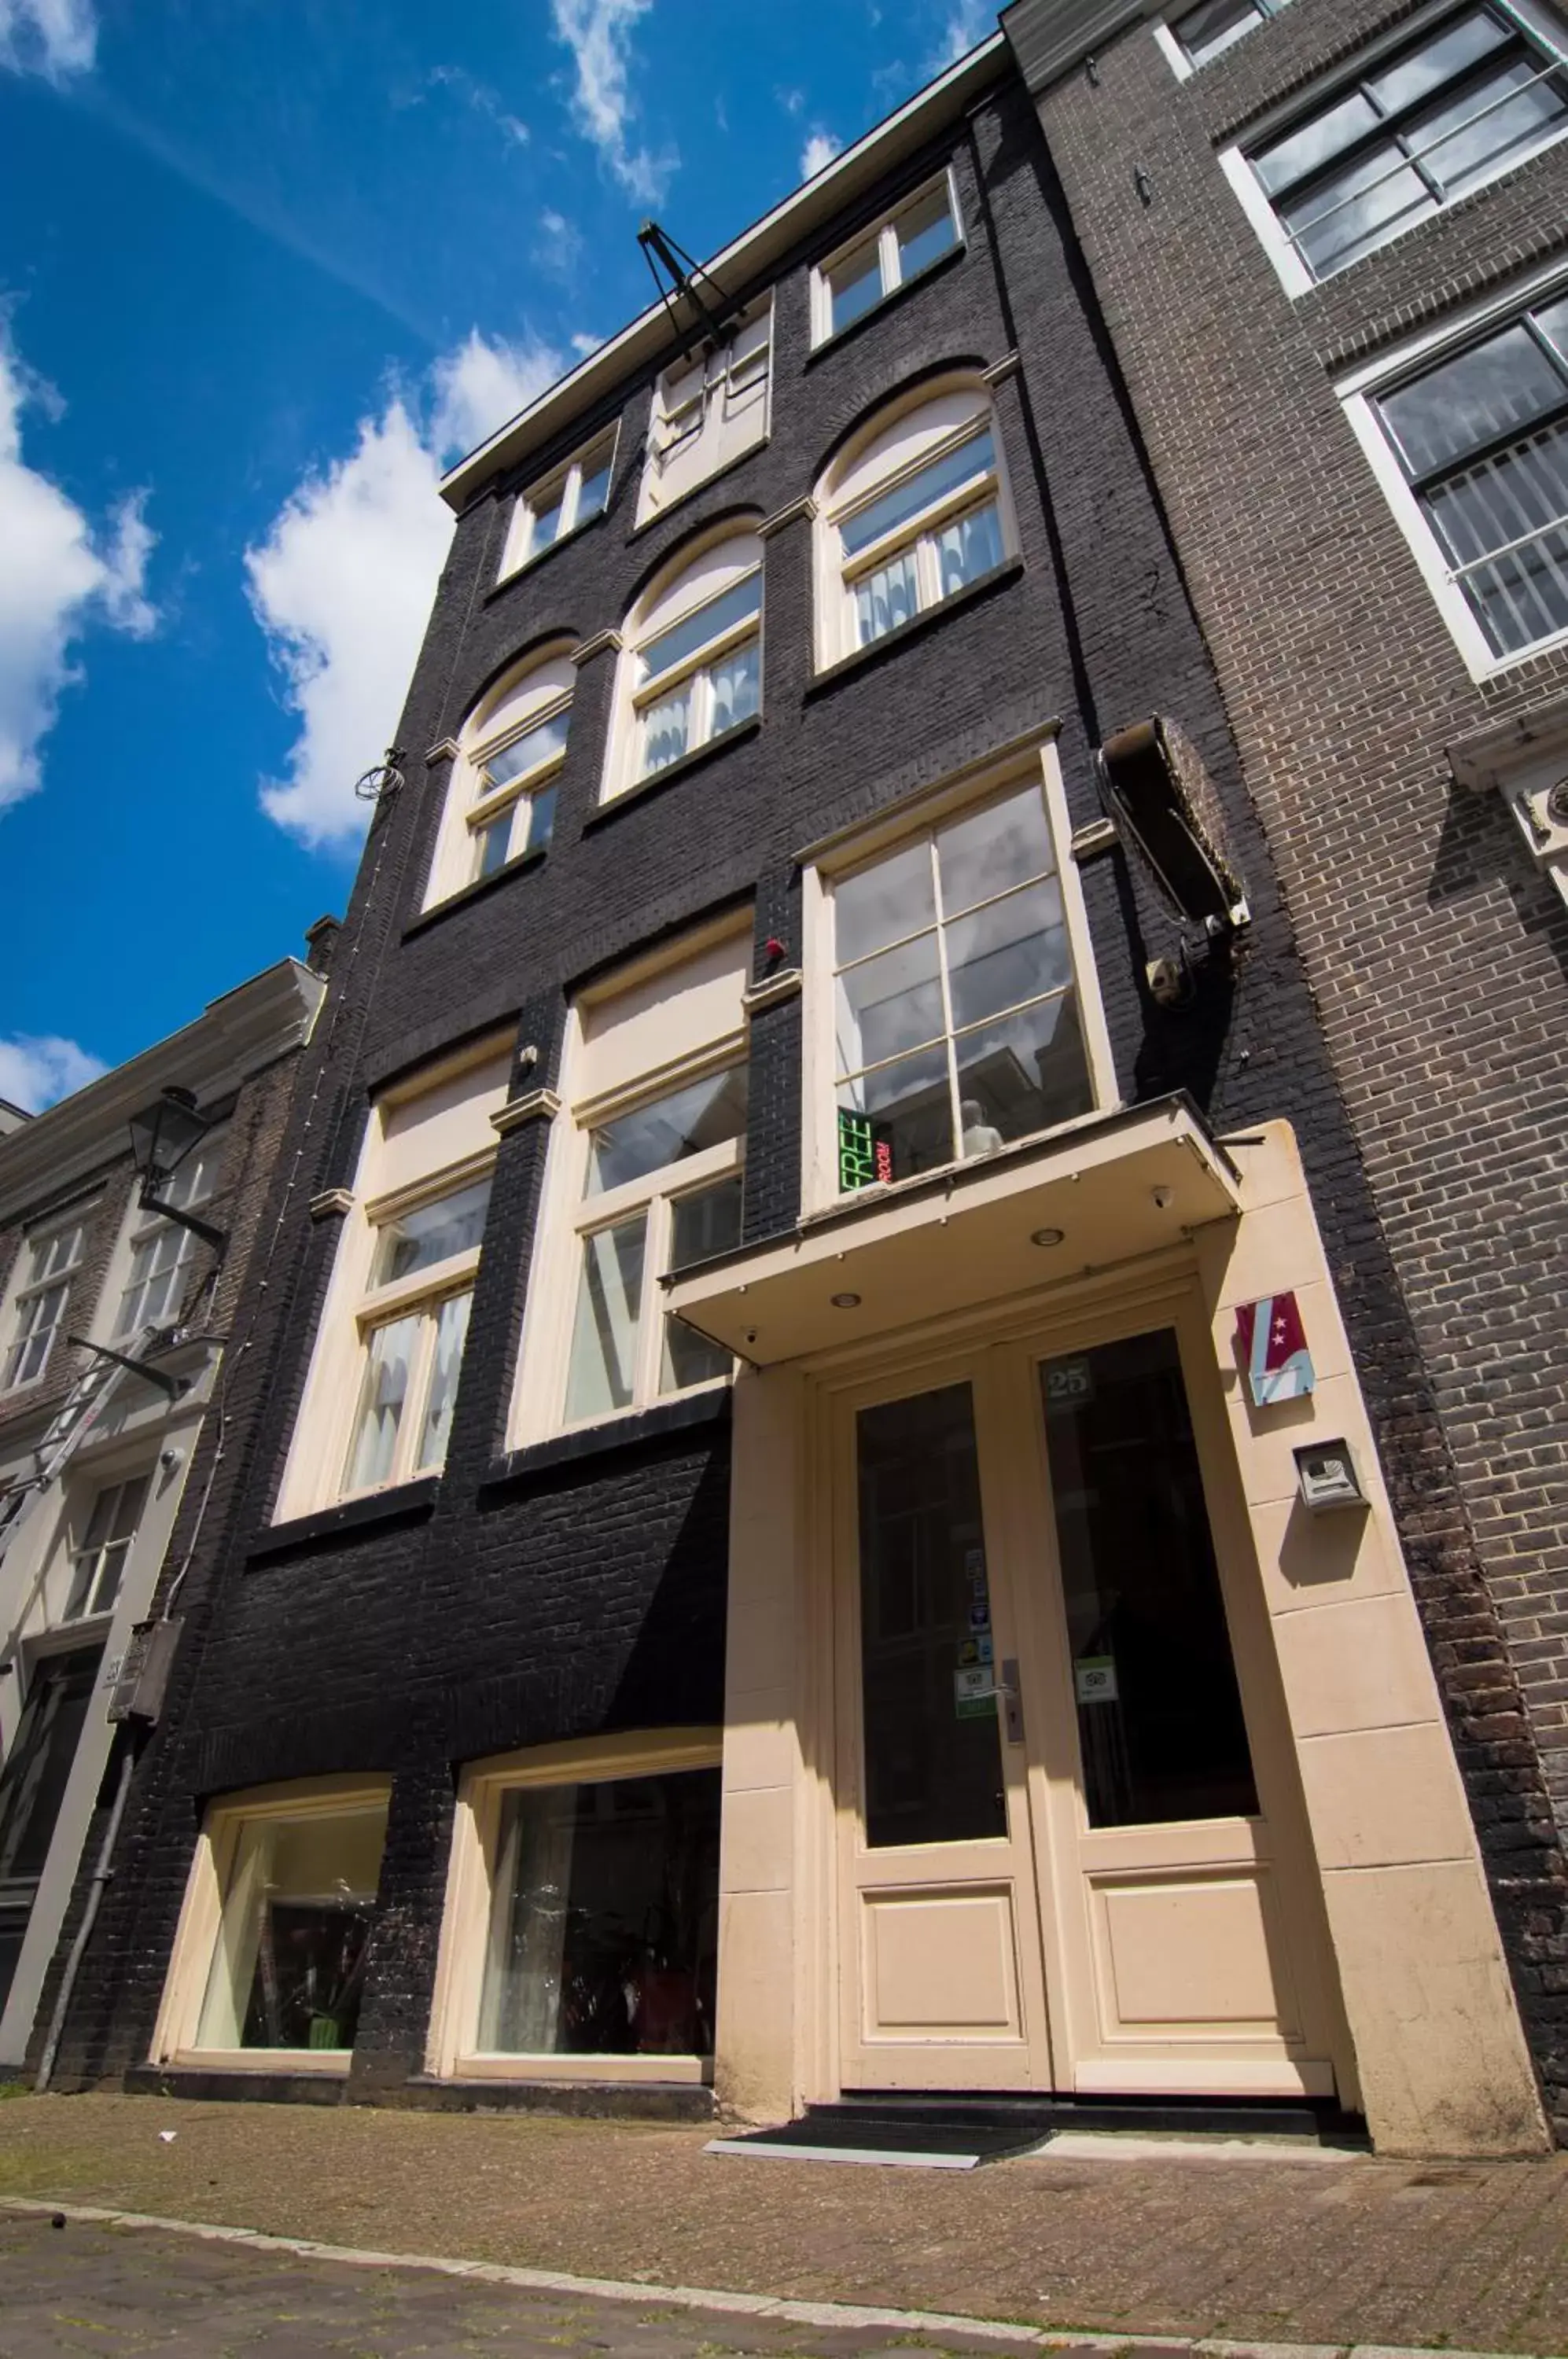 Facade/entrance, Property Building in Amsterdam Downtown Hotel